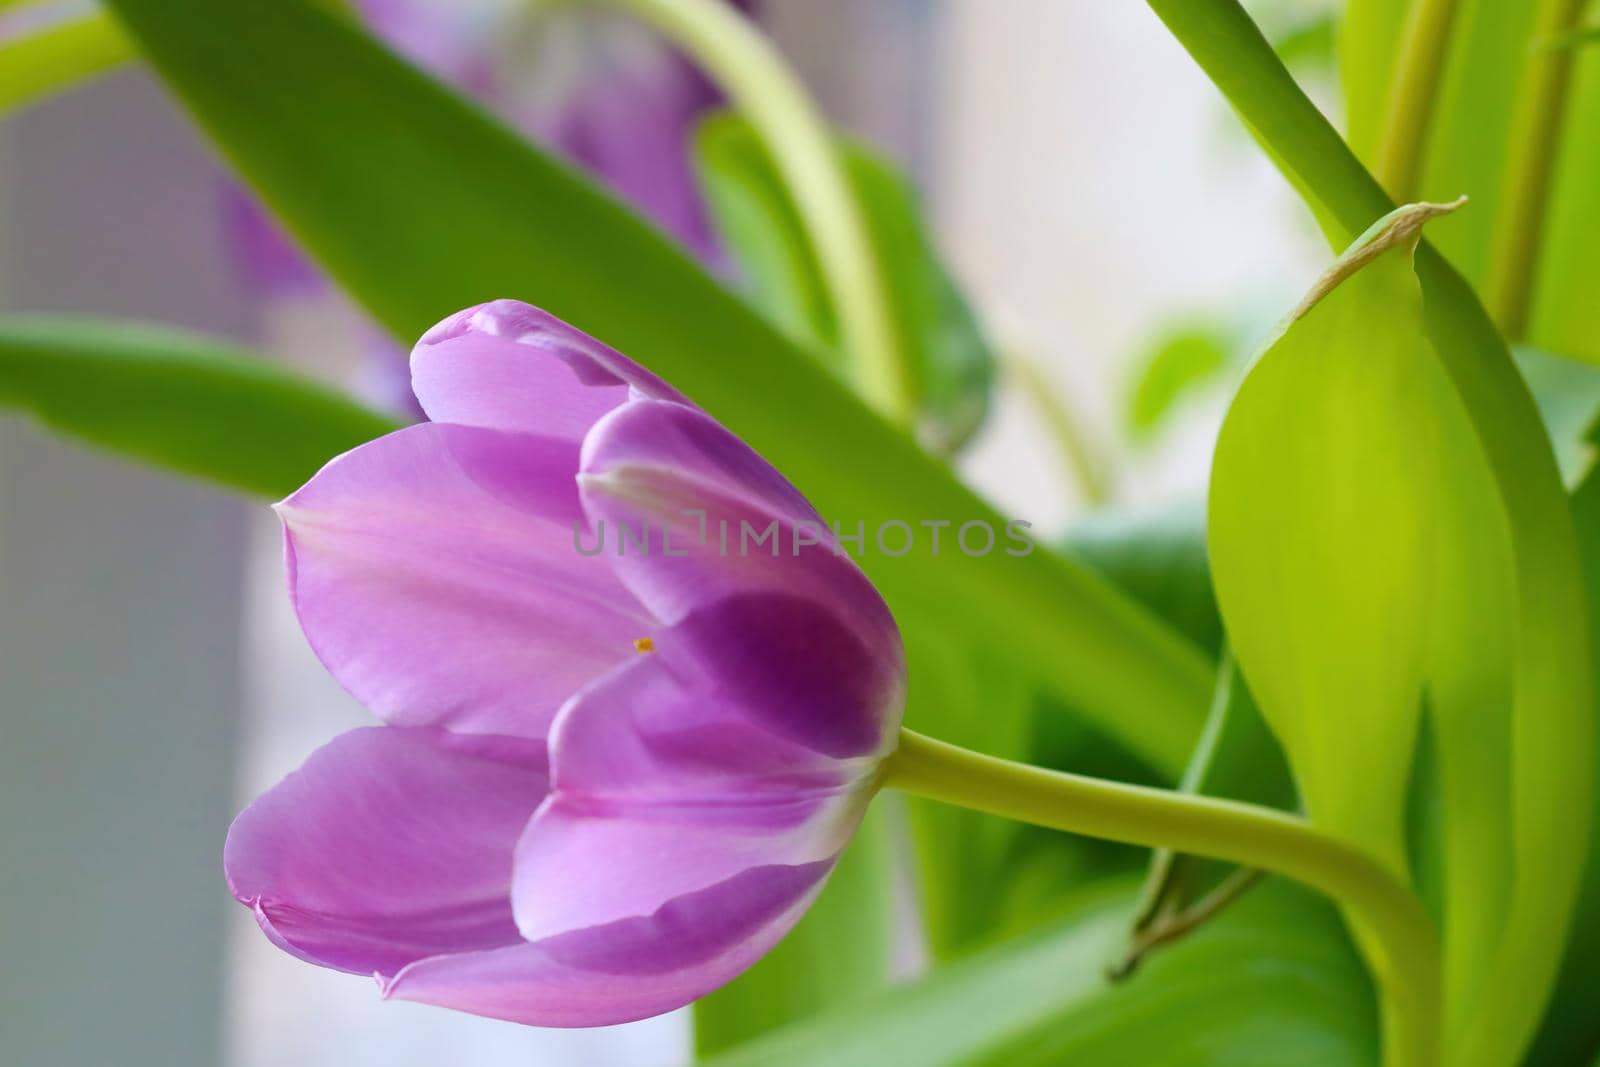 View of the purple flowering tulip close-up